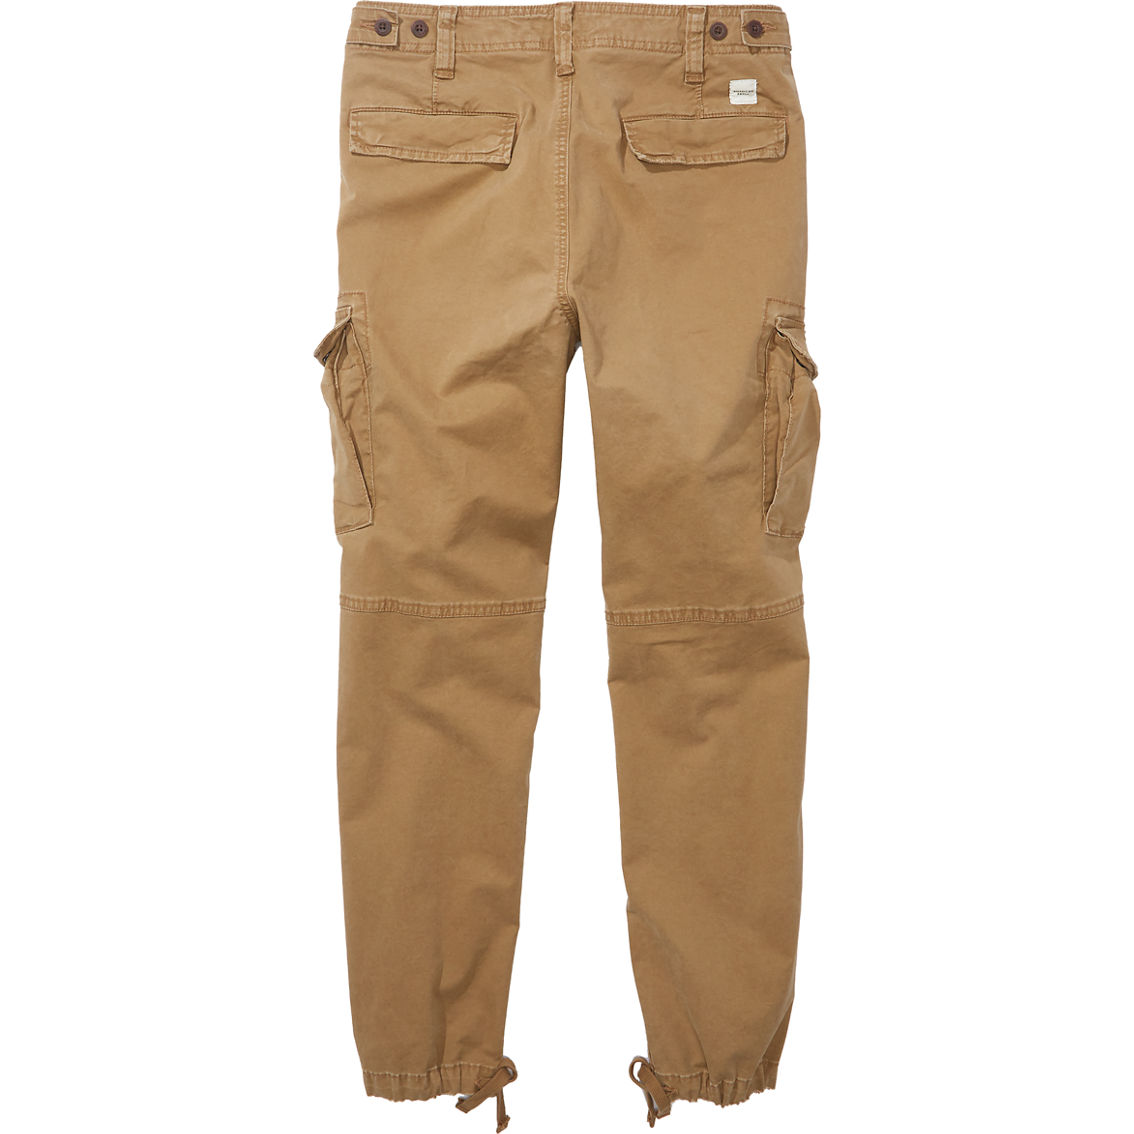 American Eagle Flex Slim Lived-in Cargo Pants | Pants | Clothing ...